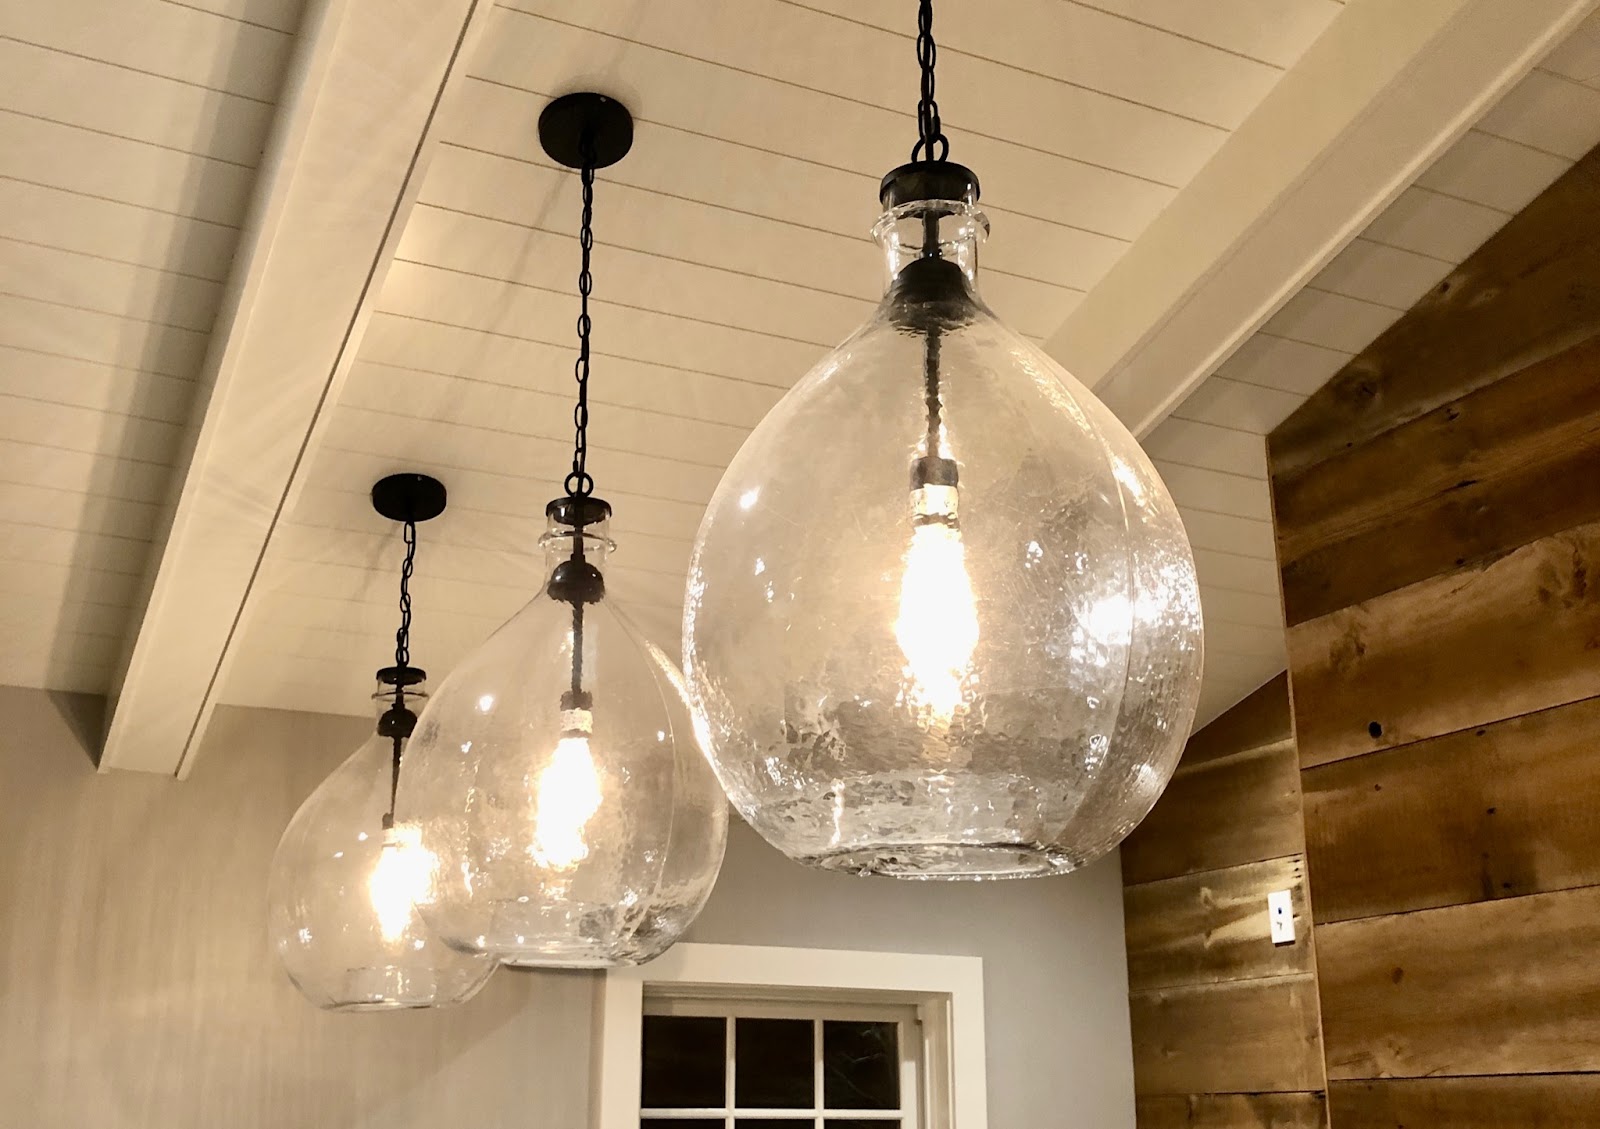 Pitted glass large drop pendant lights